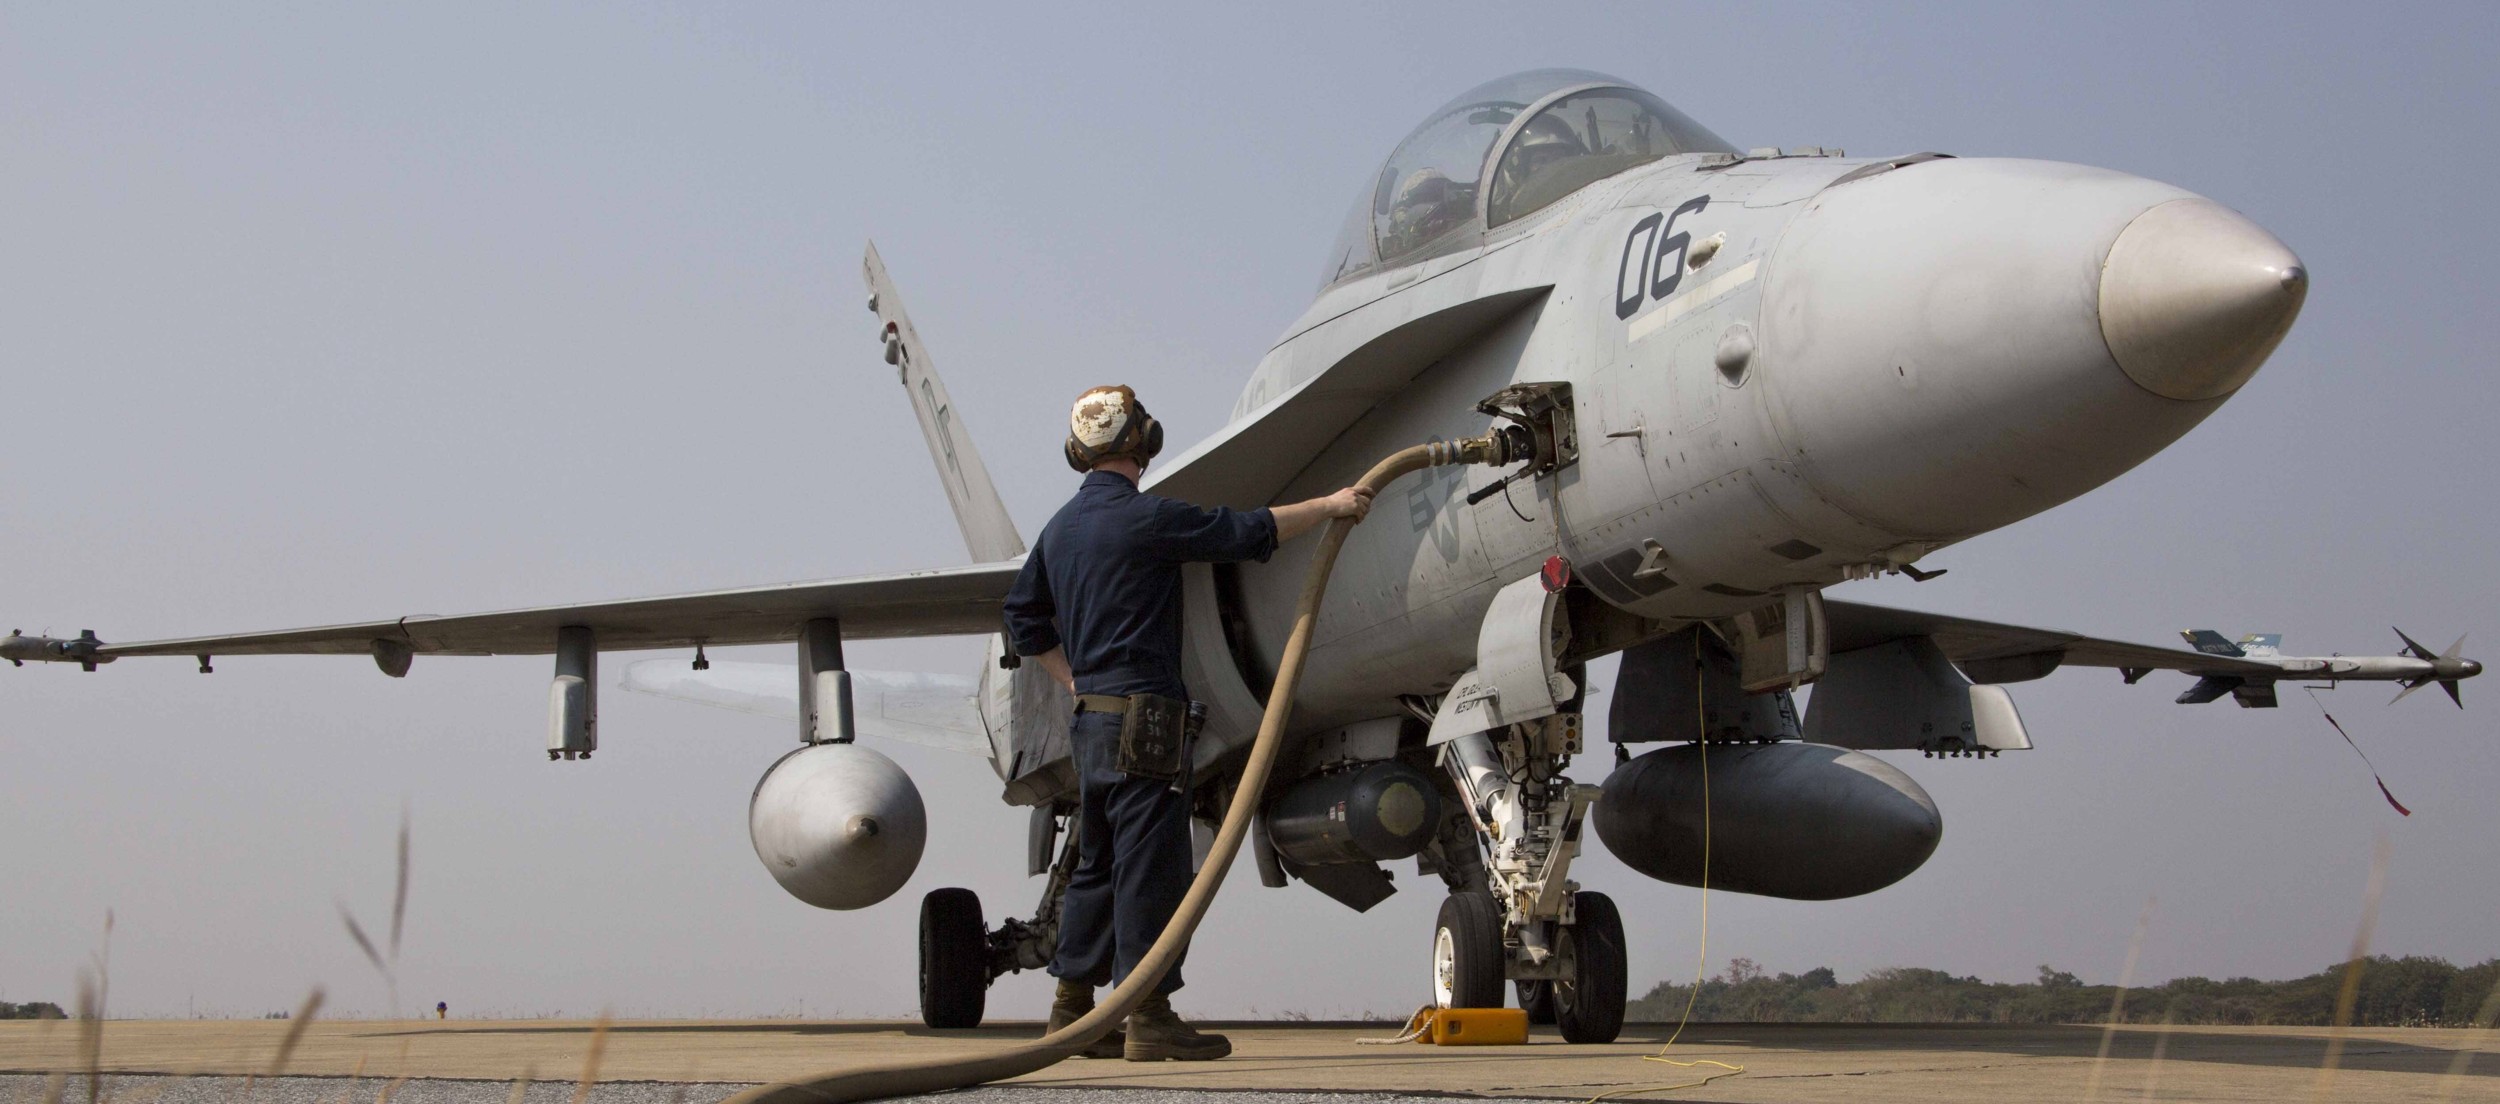 vmfa(aw)-242 bats marine all-weather fighter attack squadron usmc f/a-18d hornet 05 exercise cobra gold thailand